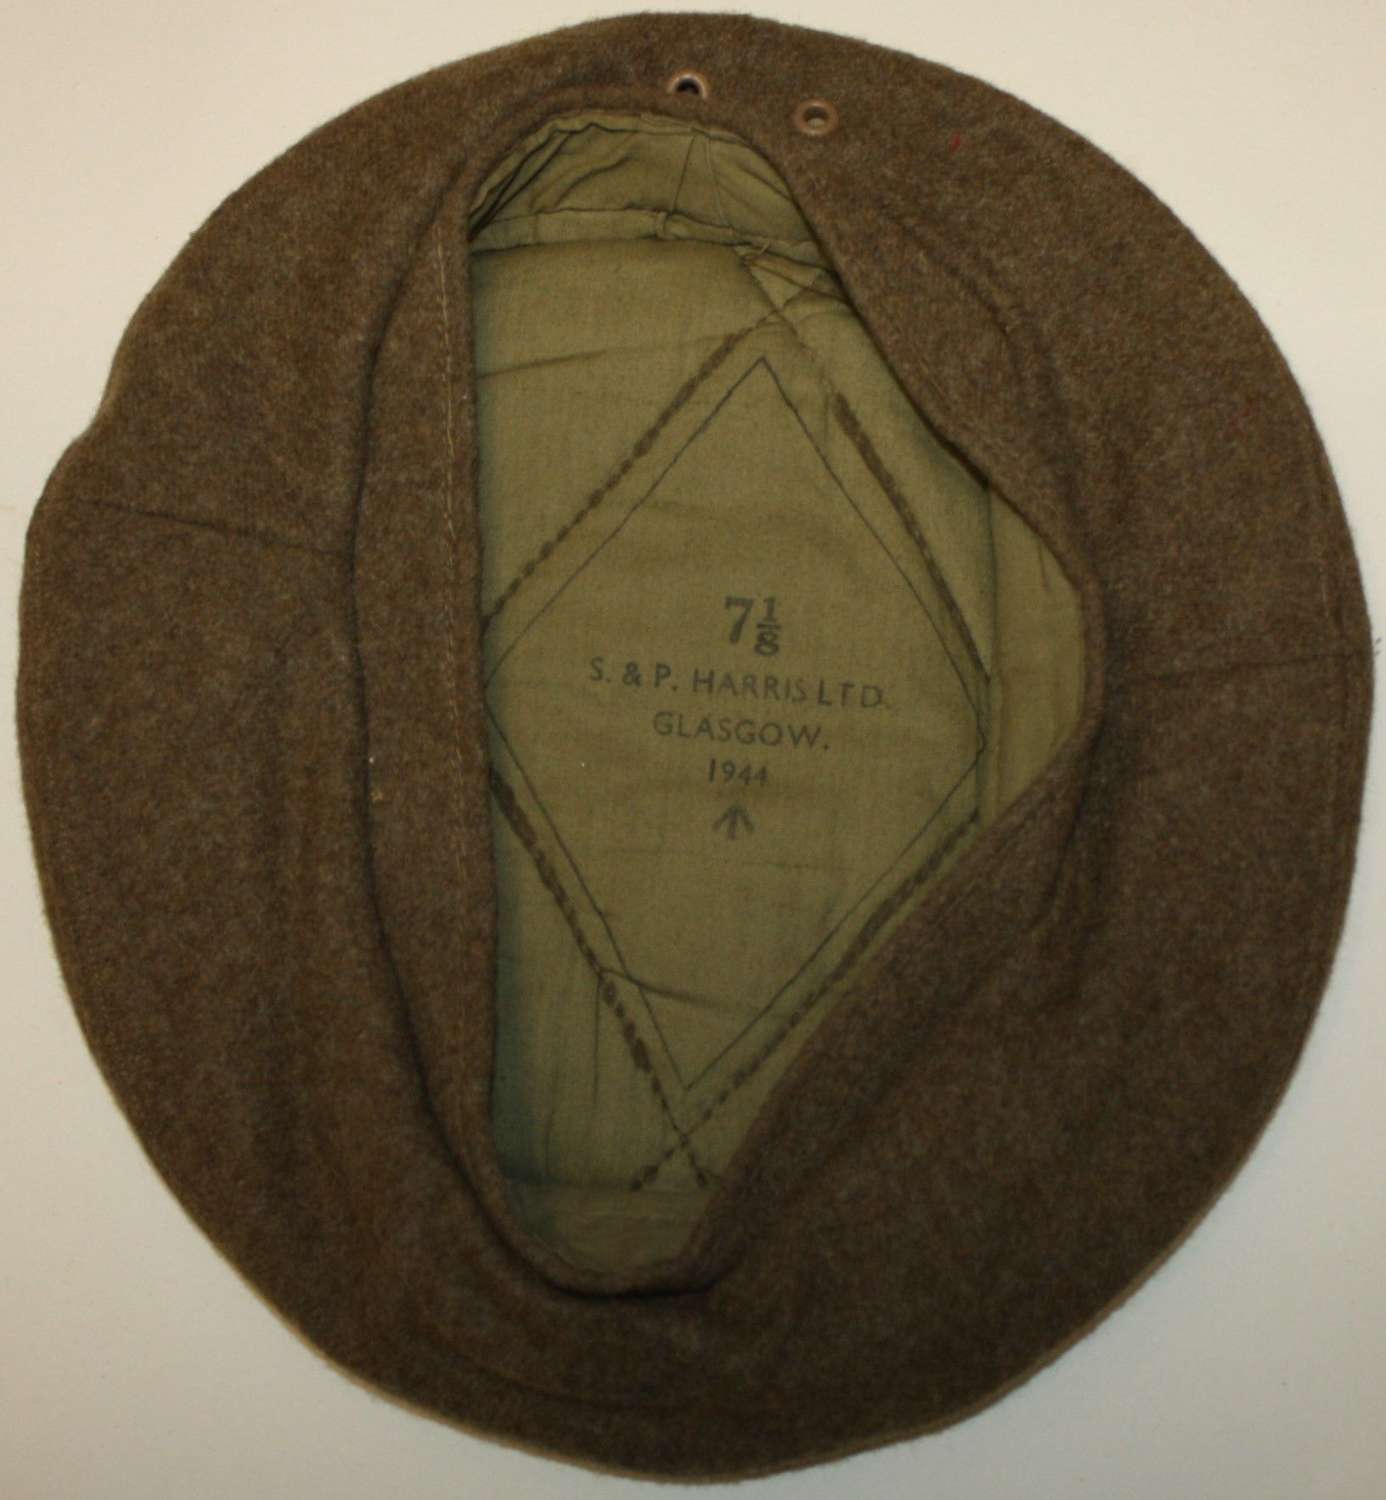 A VERY GOOD SIZE 7 1/8 GS BERET 1944 DATED